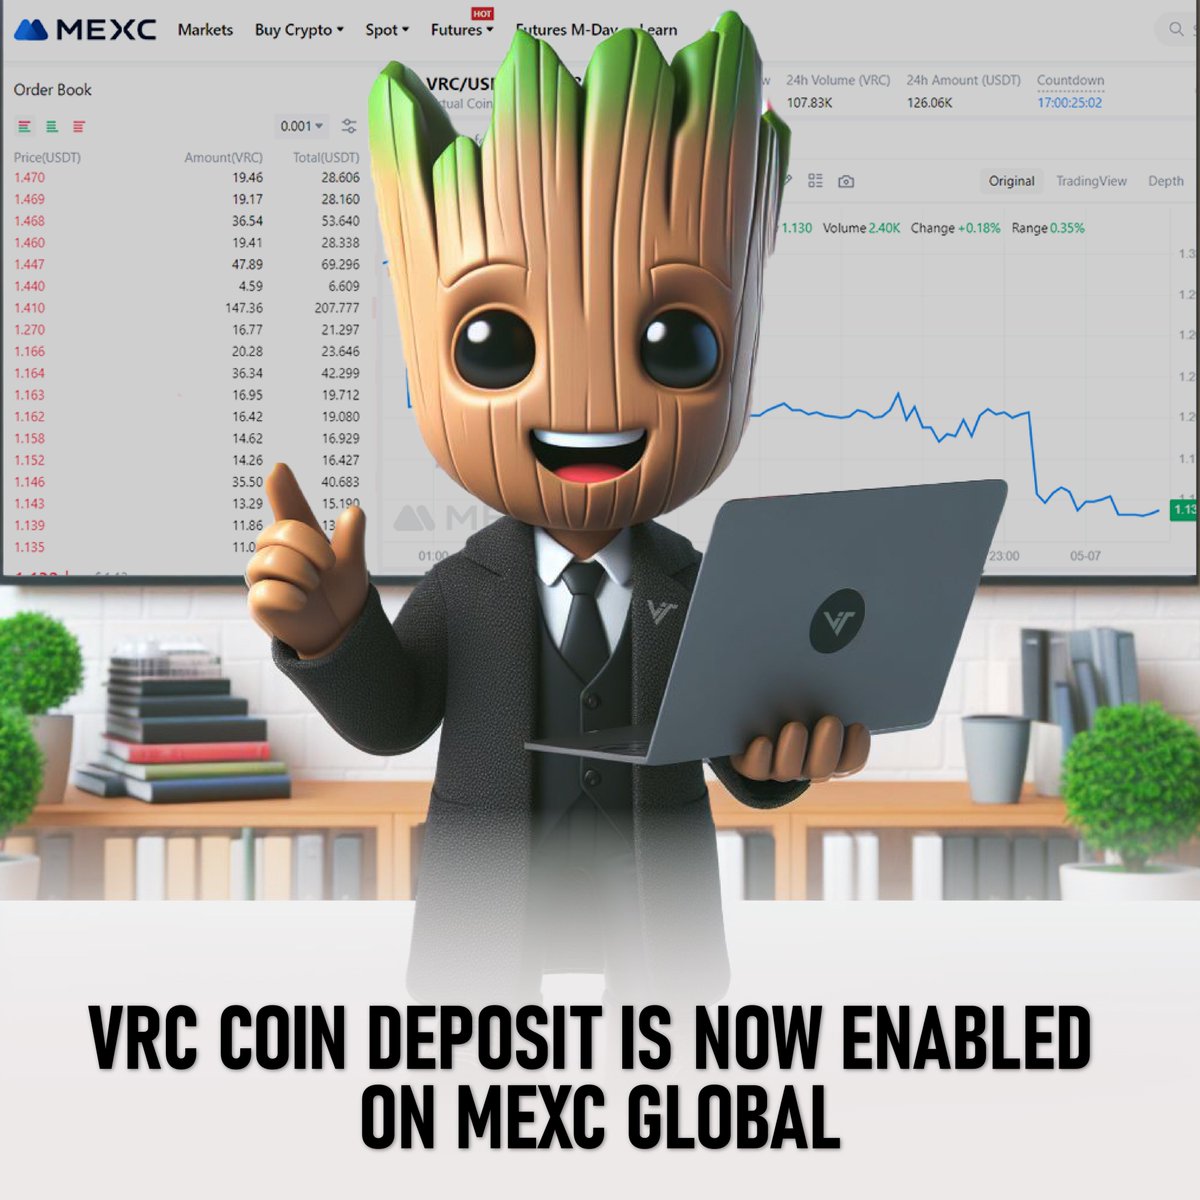 Breaking news! VRC Deposits are now open on MEXC Global starting at 7pm PKT. Act fast and dive into the excitement!

MEXC Global: 👉mexc.com/exchange/VRC_U…

#VRC #MEXCGlobal #CryptoDeposit #OpportunityKnocks #BlockchainNews #CryptoTrading #GetReadyNow #Trading #Staking #VRCCoin